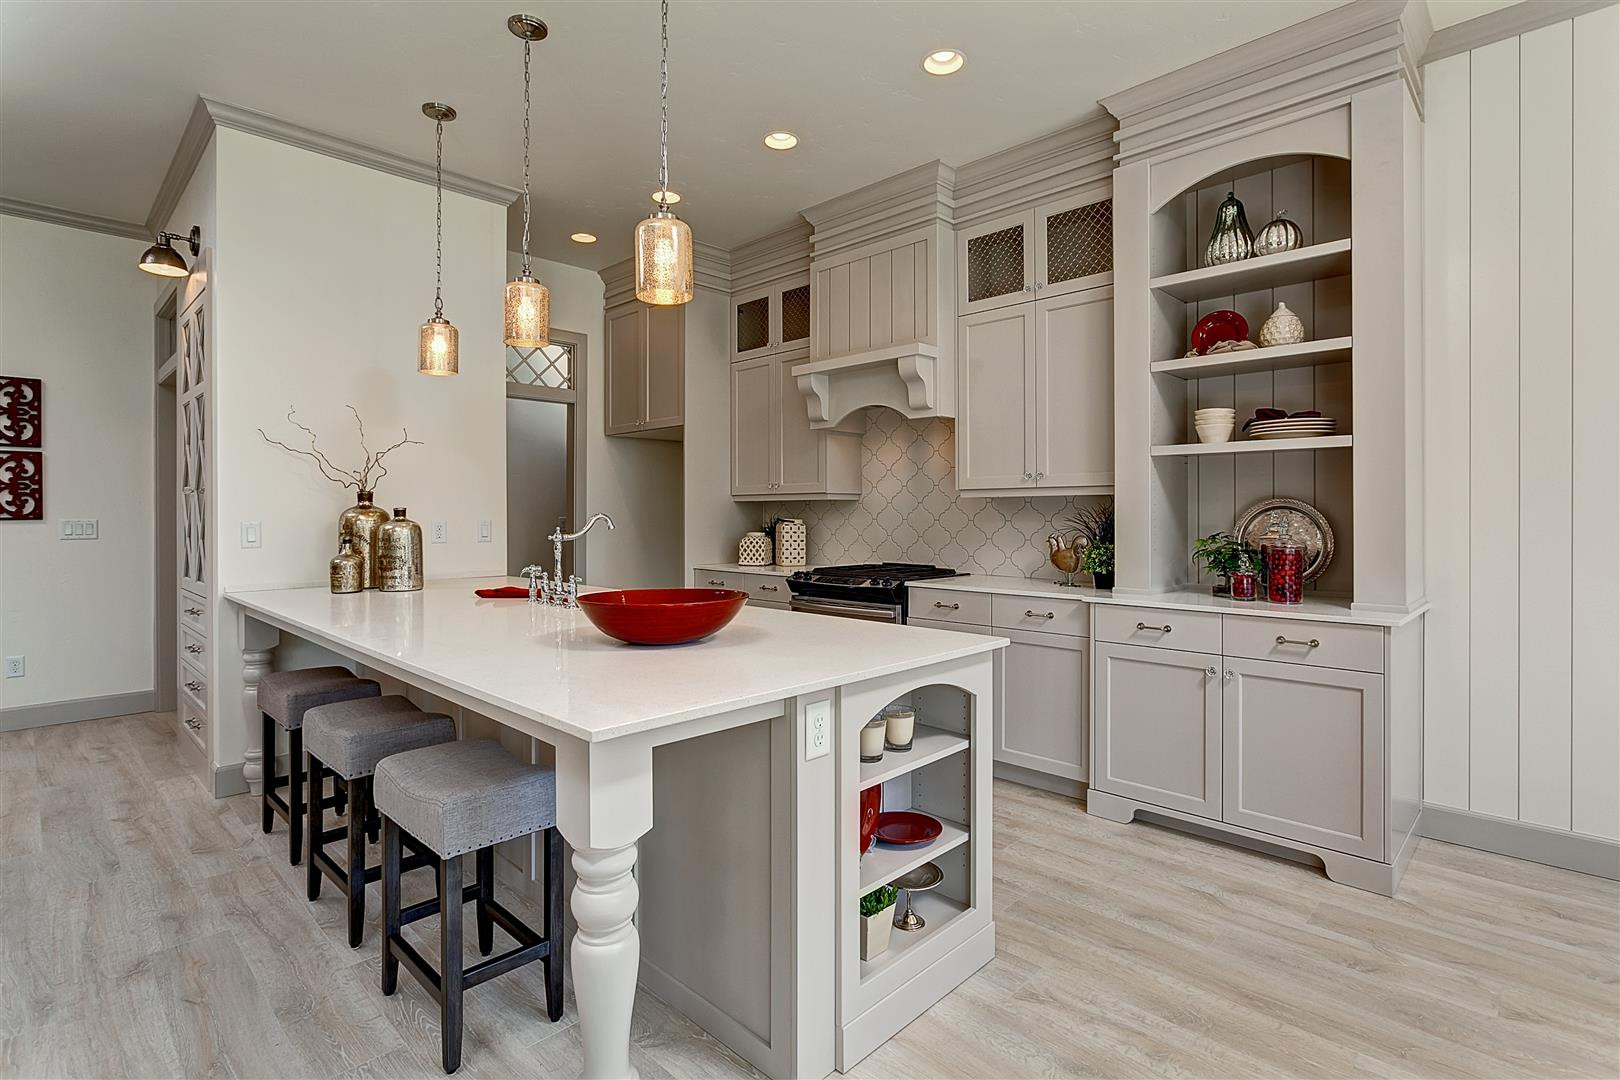 75 Light Wood Floor Kitchen With Beige Cabinets Ideas You'Ll Love - May,  2023 | Houzz